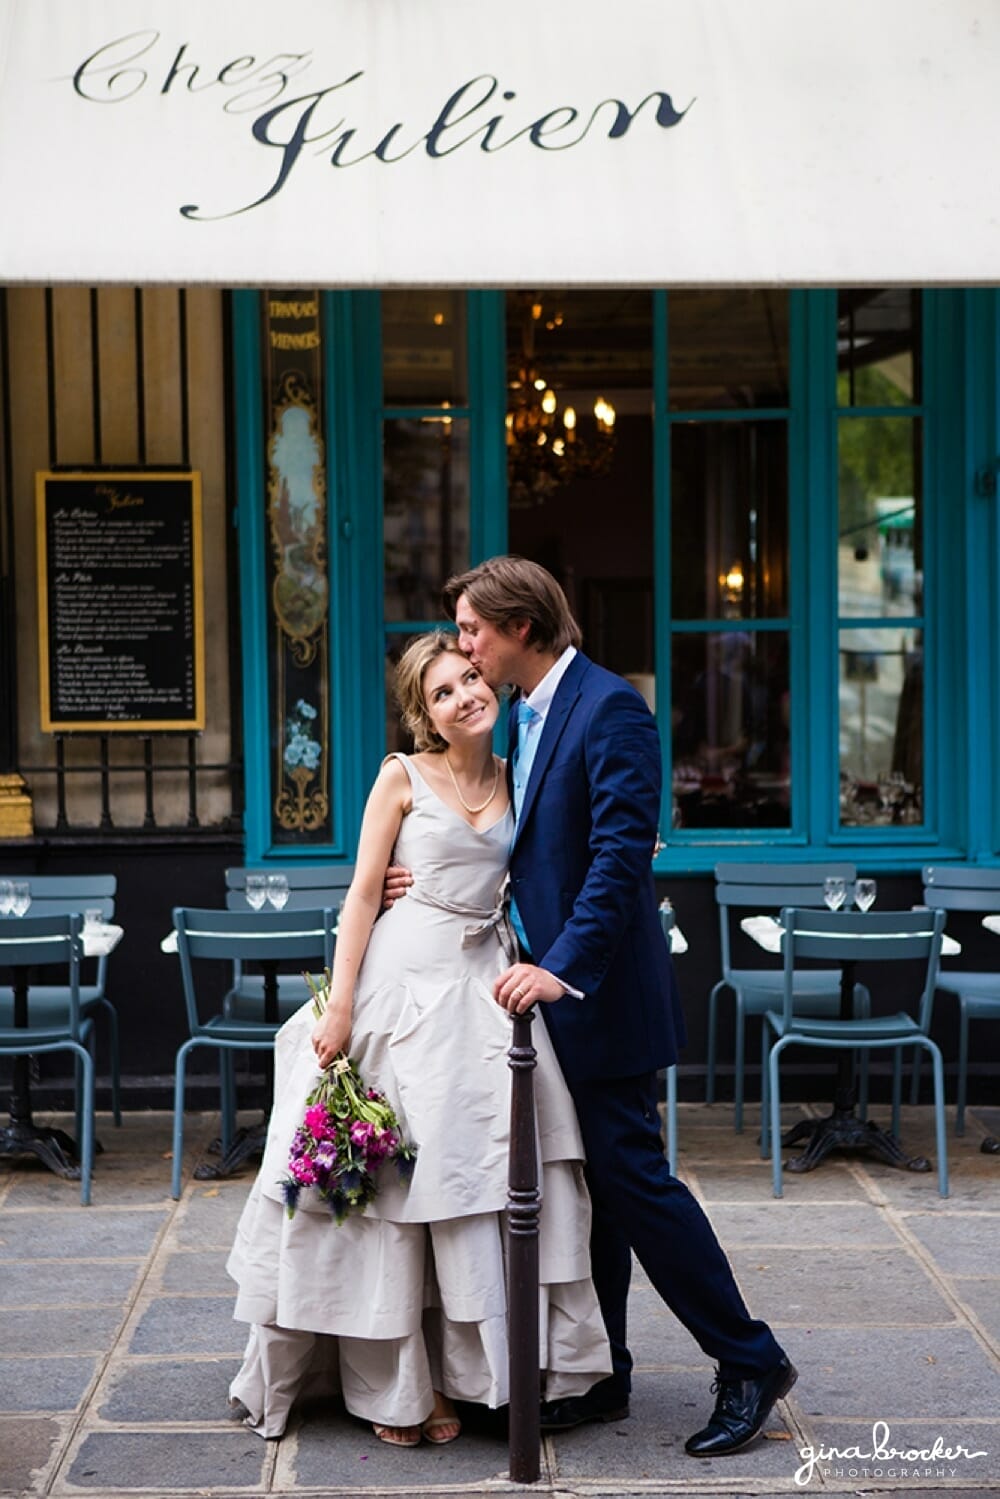 Bride and Groom outside a French Cafe in Paris